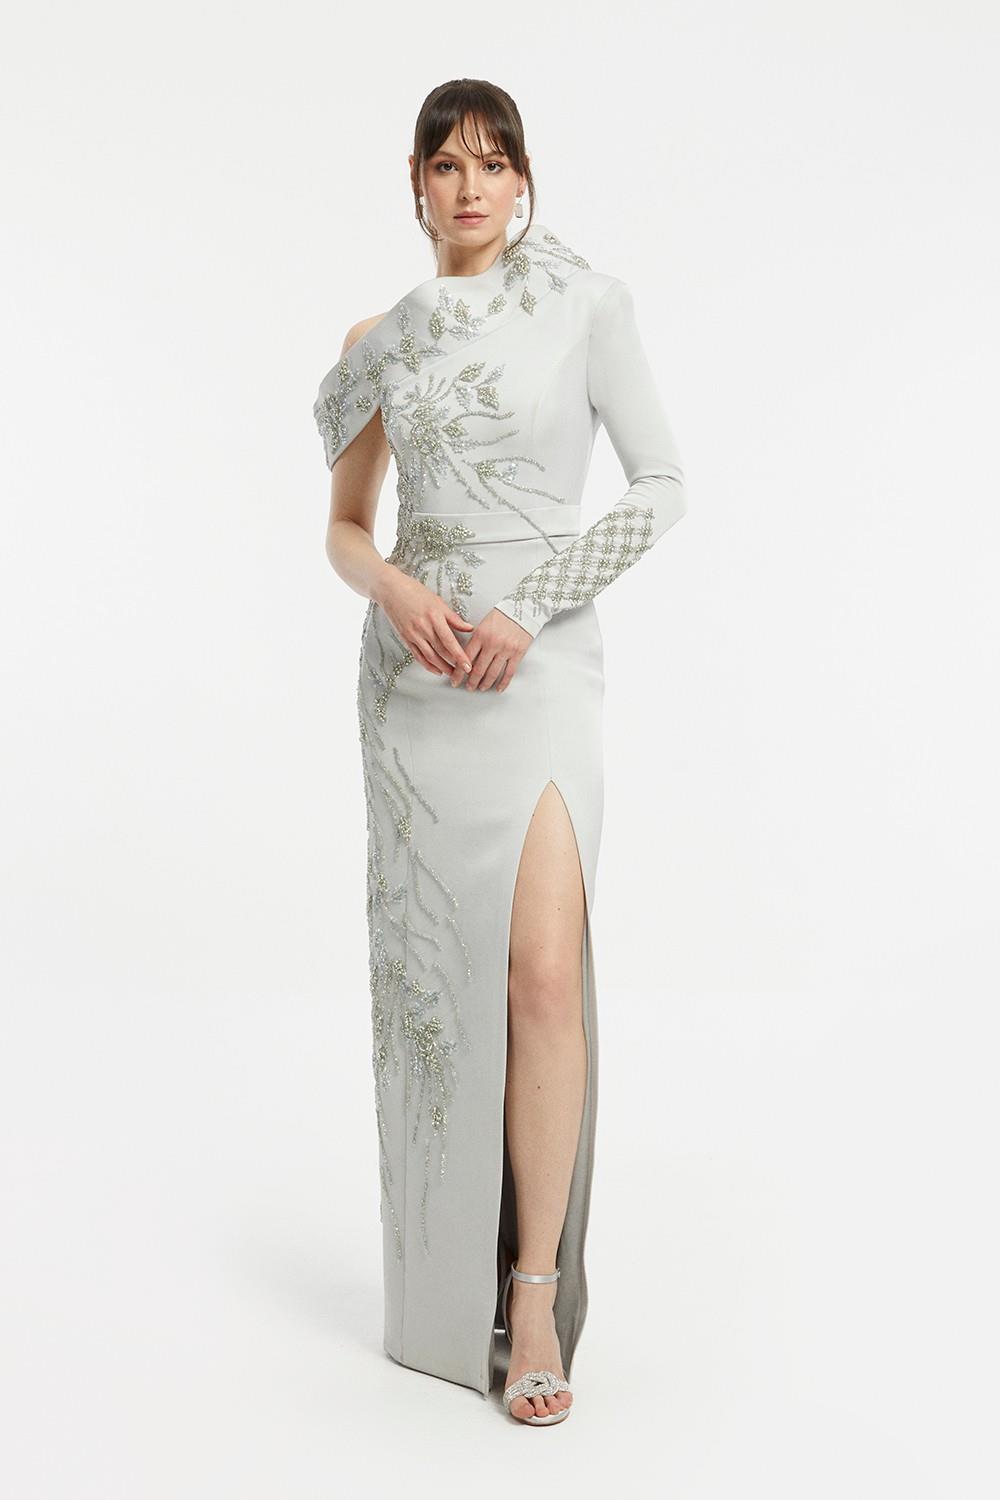 Single Sleeve Embroidered Long Evening Dress